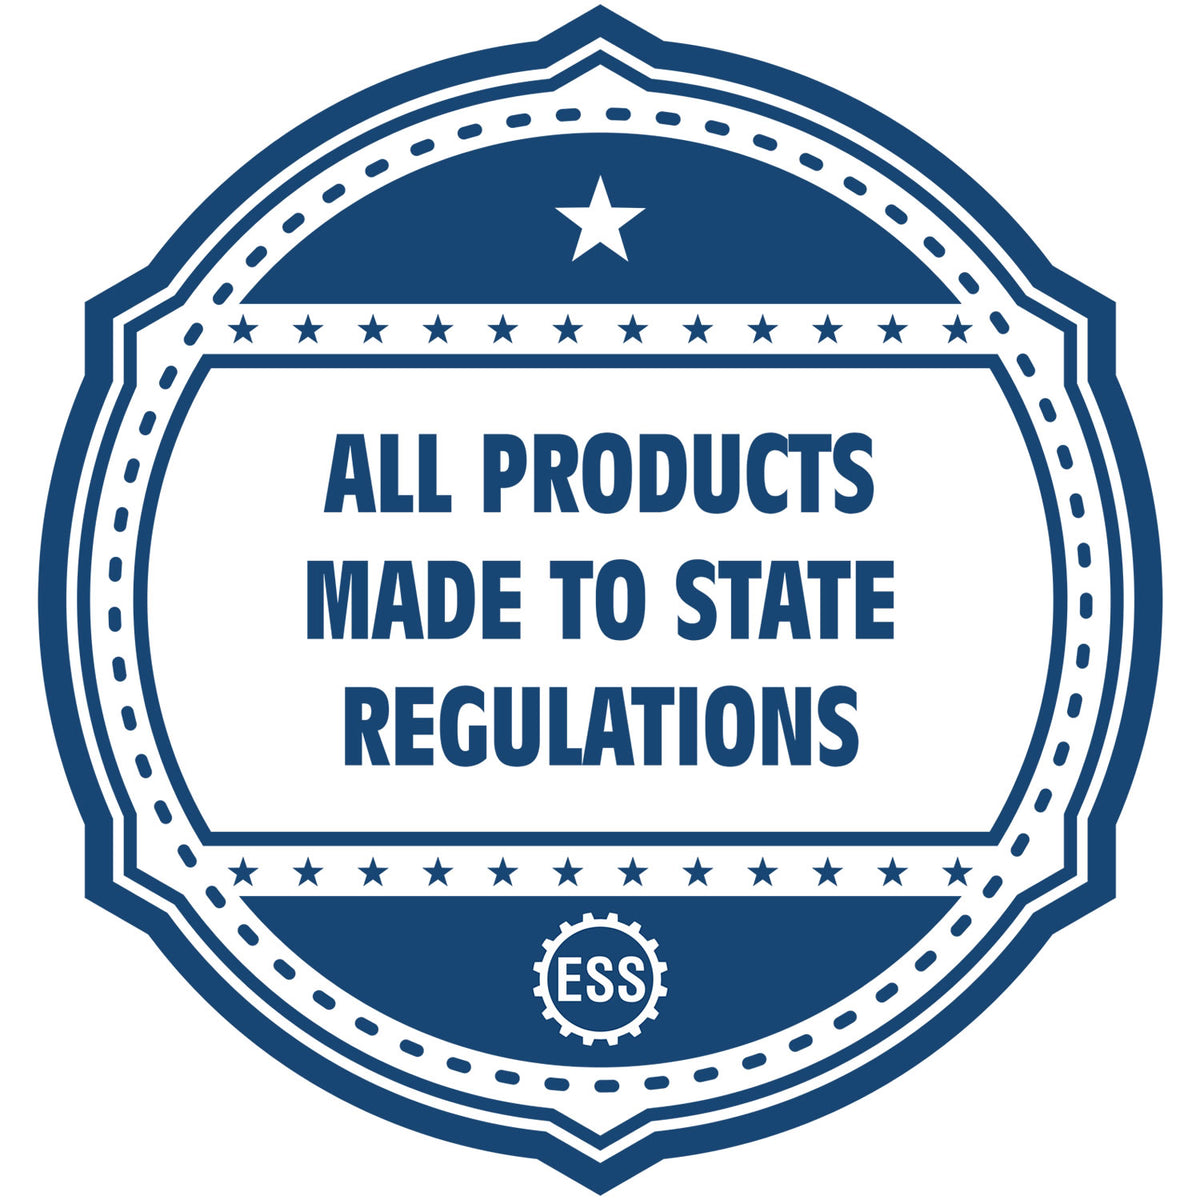 A blue icon or badge for the Hybrid Utah Architect Seal showing that this product is made in compliance with state regulations.